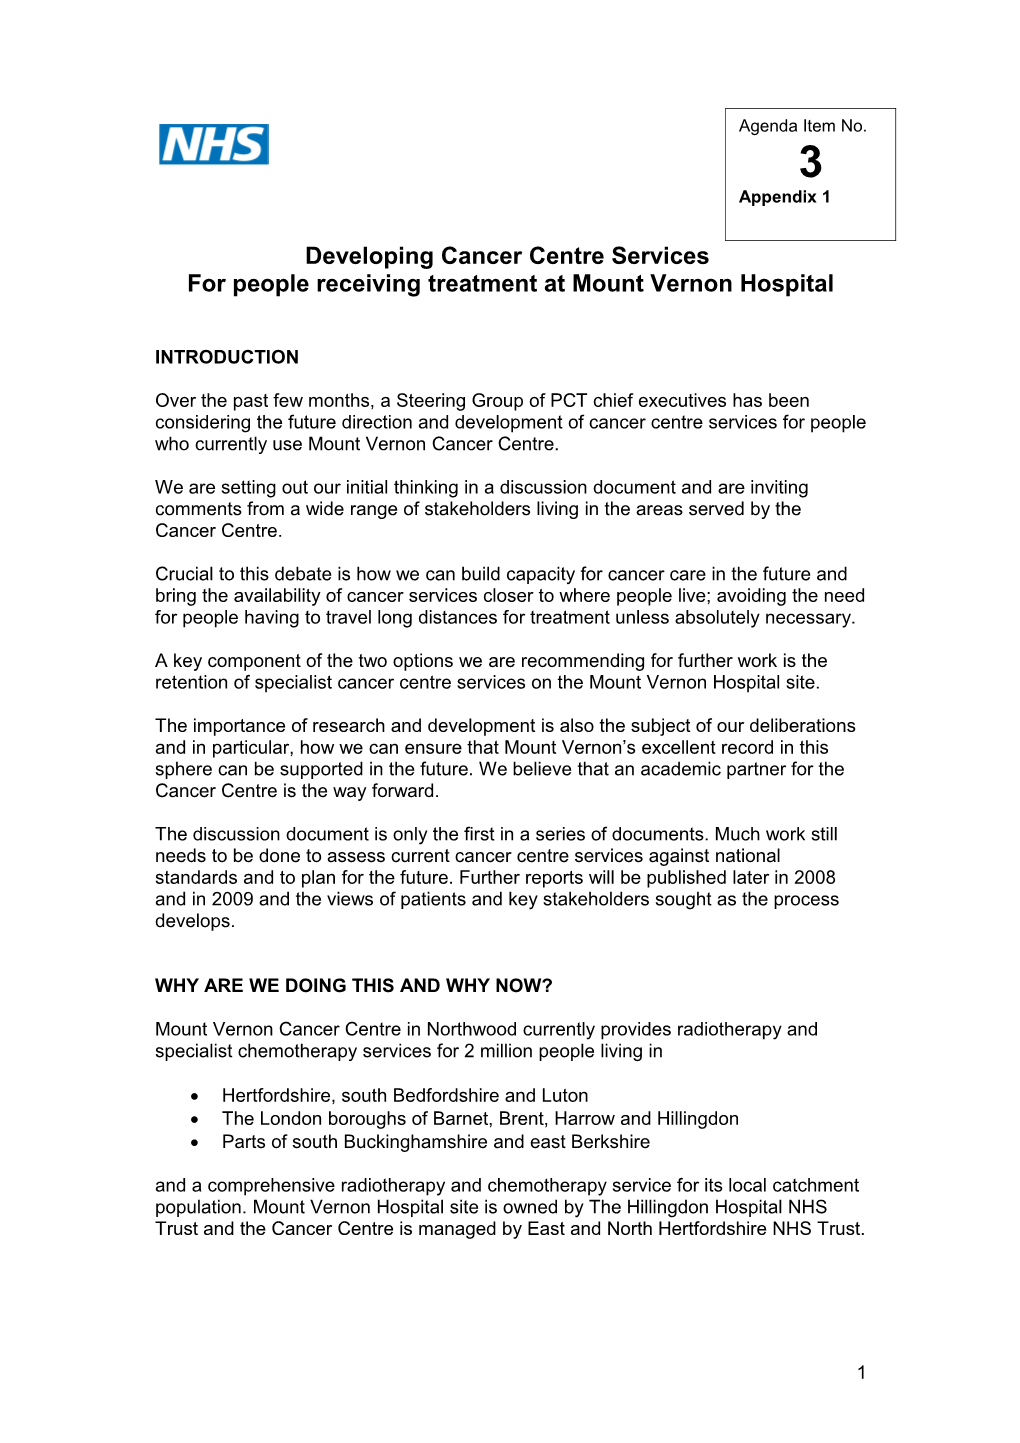 NHS Developing Cancer Centre Services for People Receiving Treatment at Mount Vernon Hospital